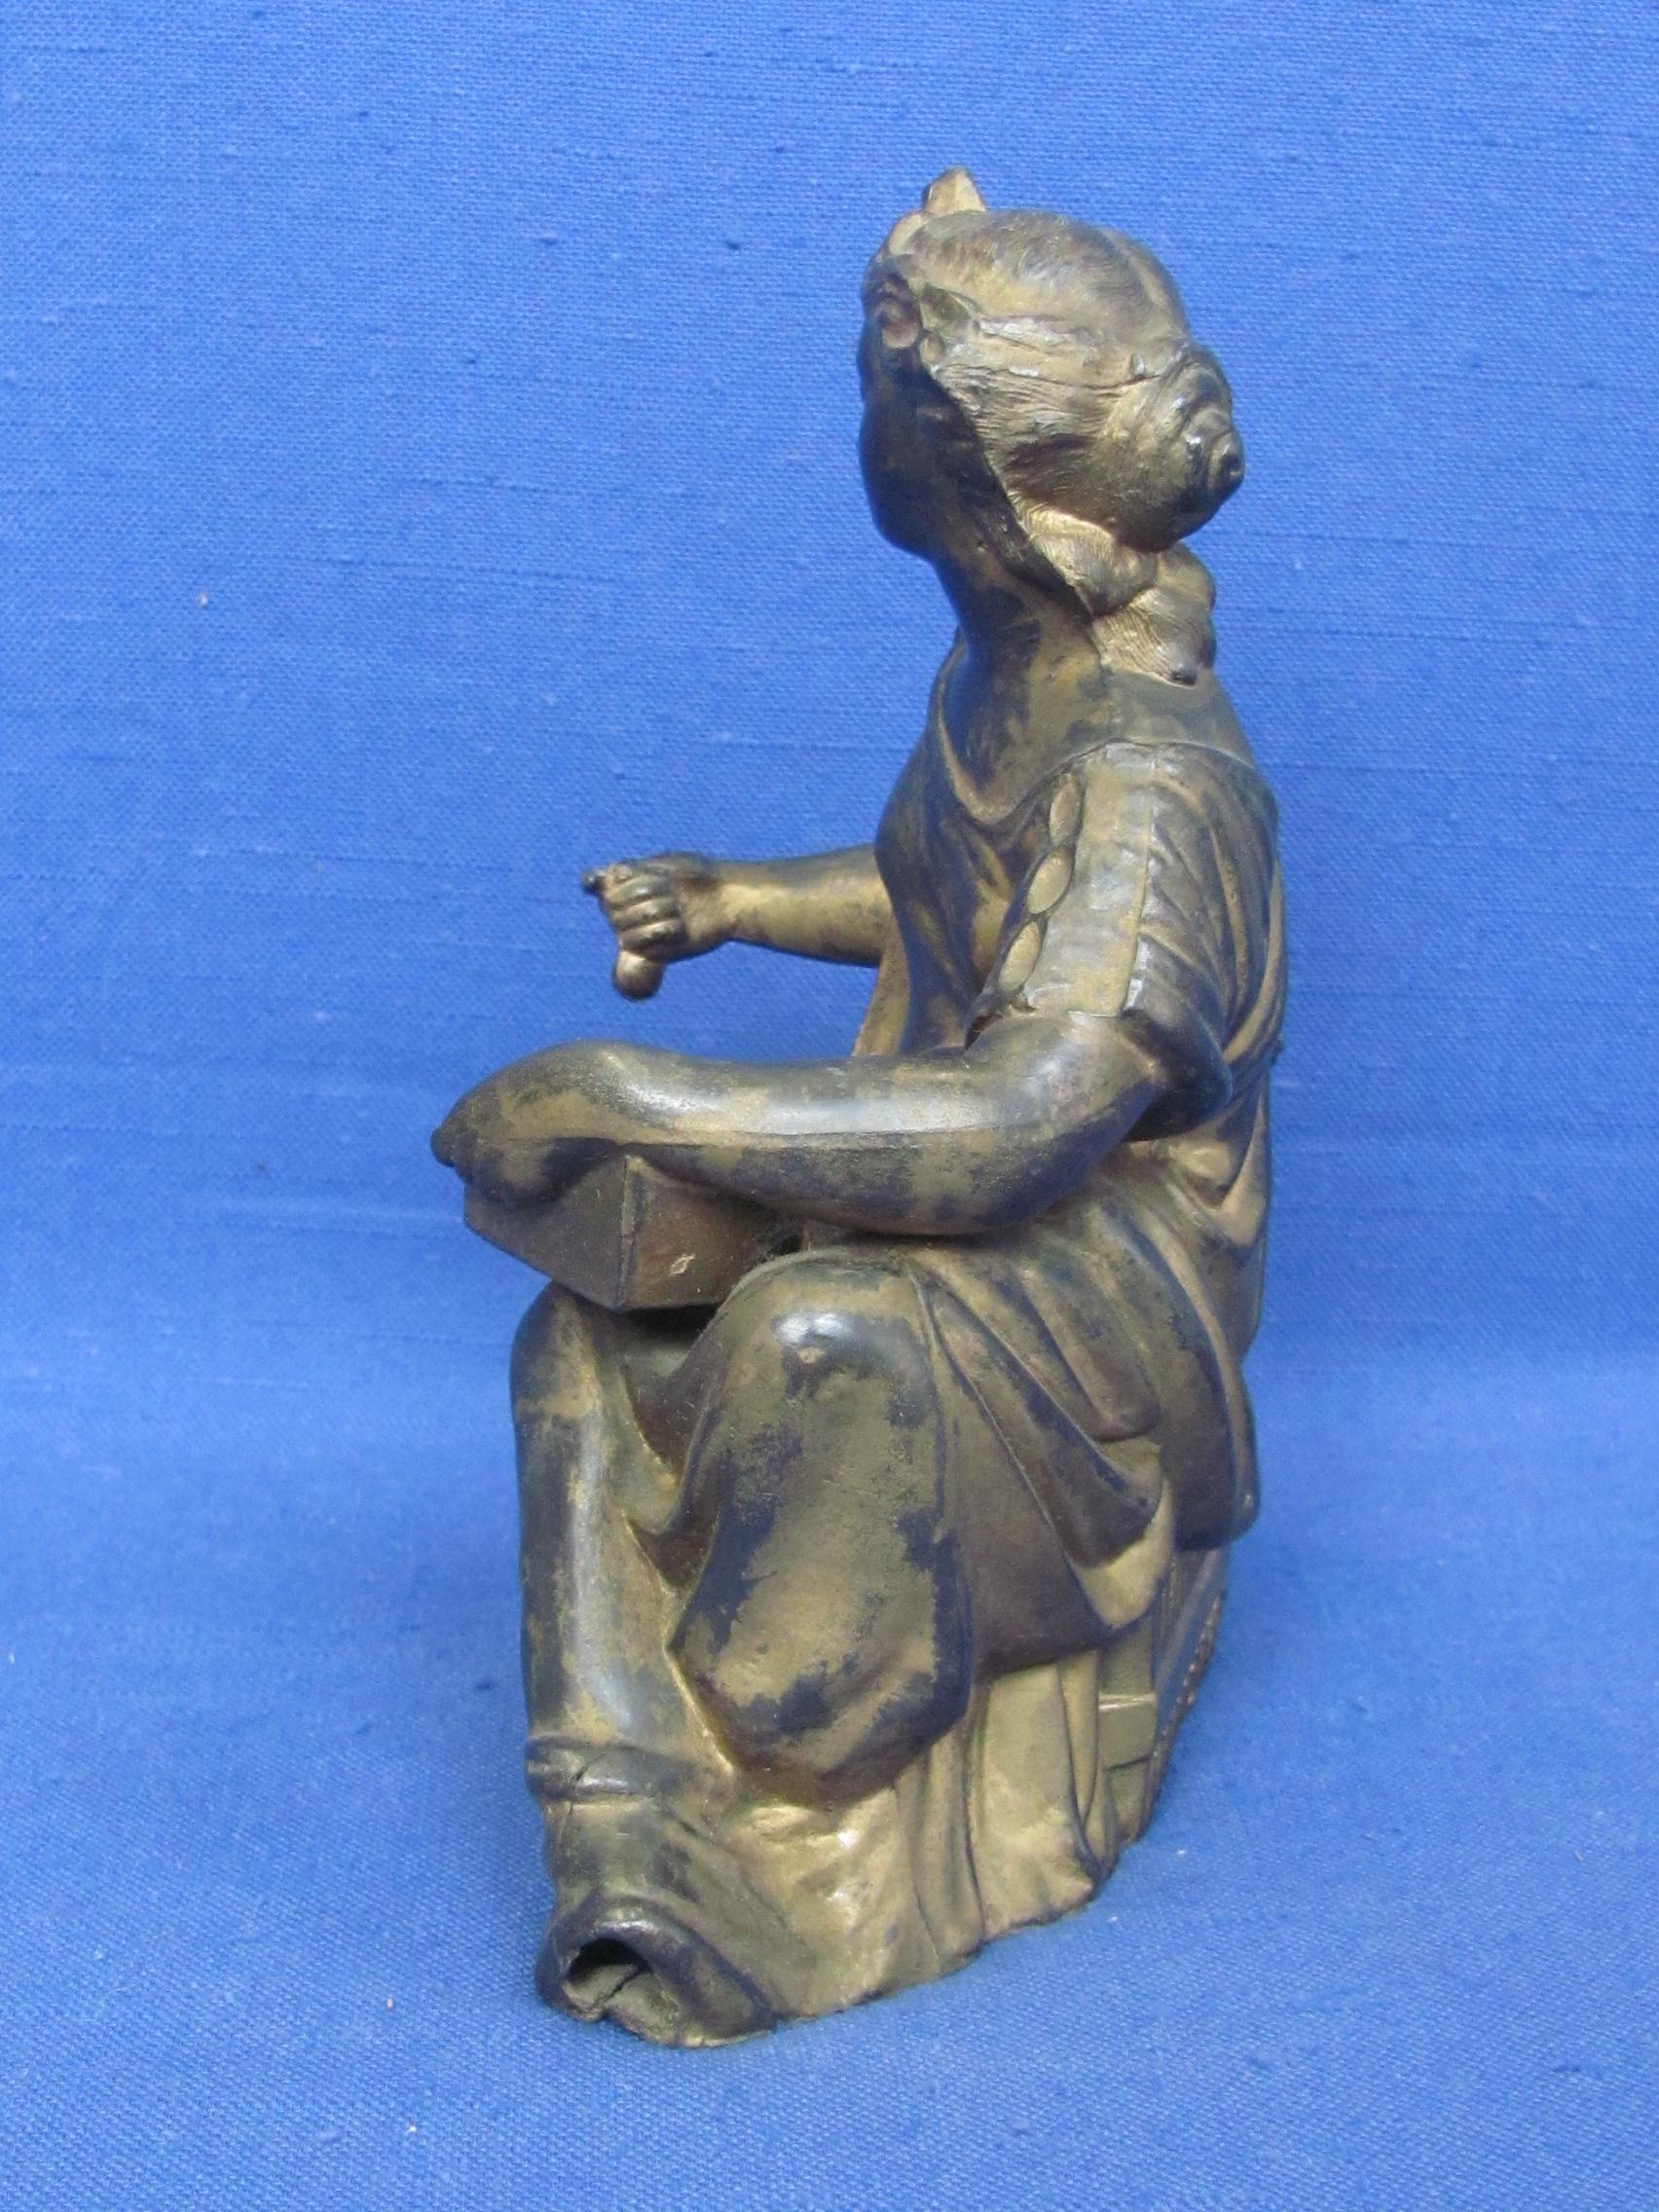 Hollow Cast Pot Metal Sculpture – Pandora with Her Box – 6 1/2” tall – Crack in front